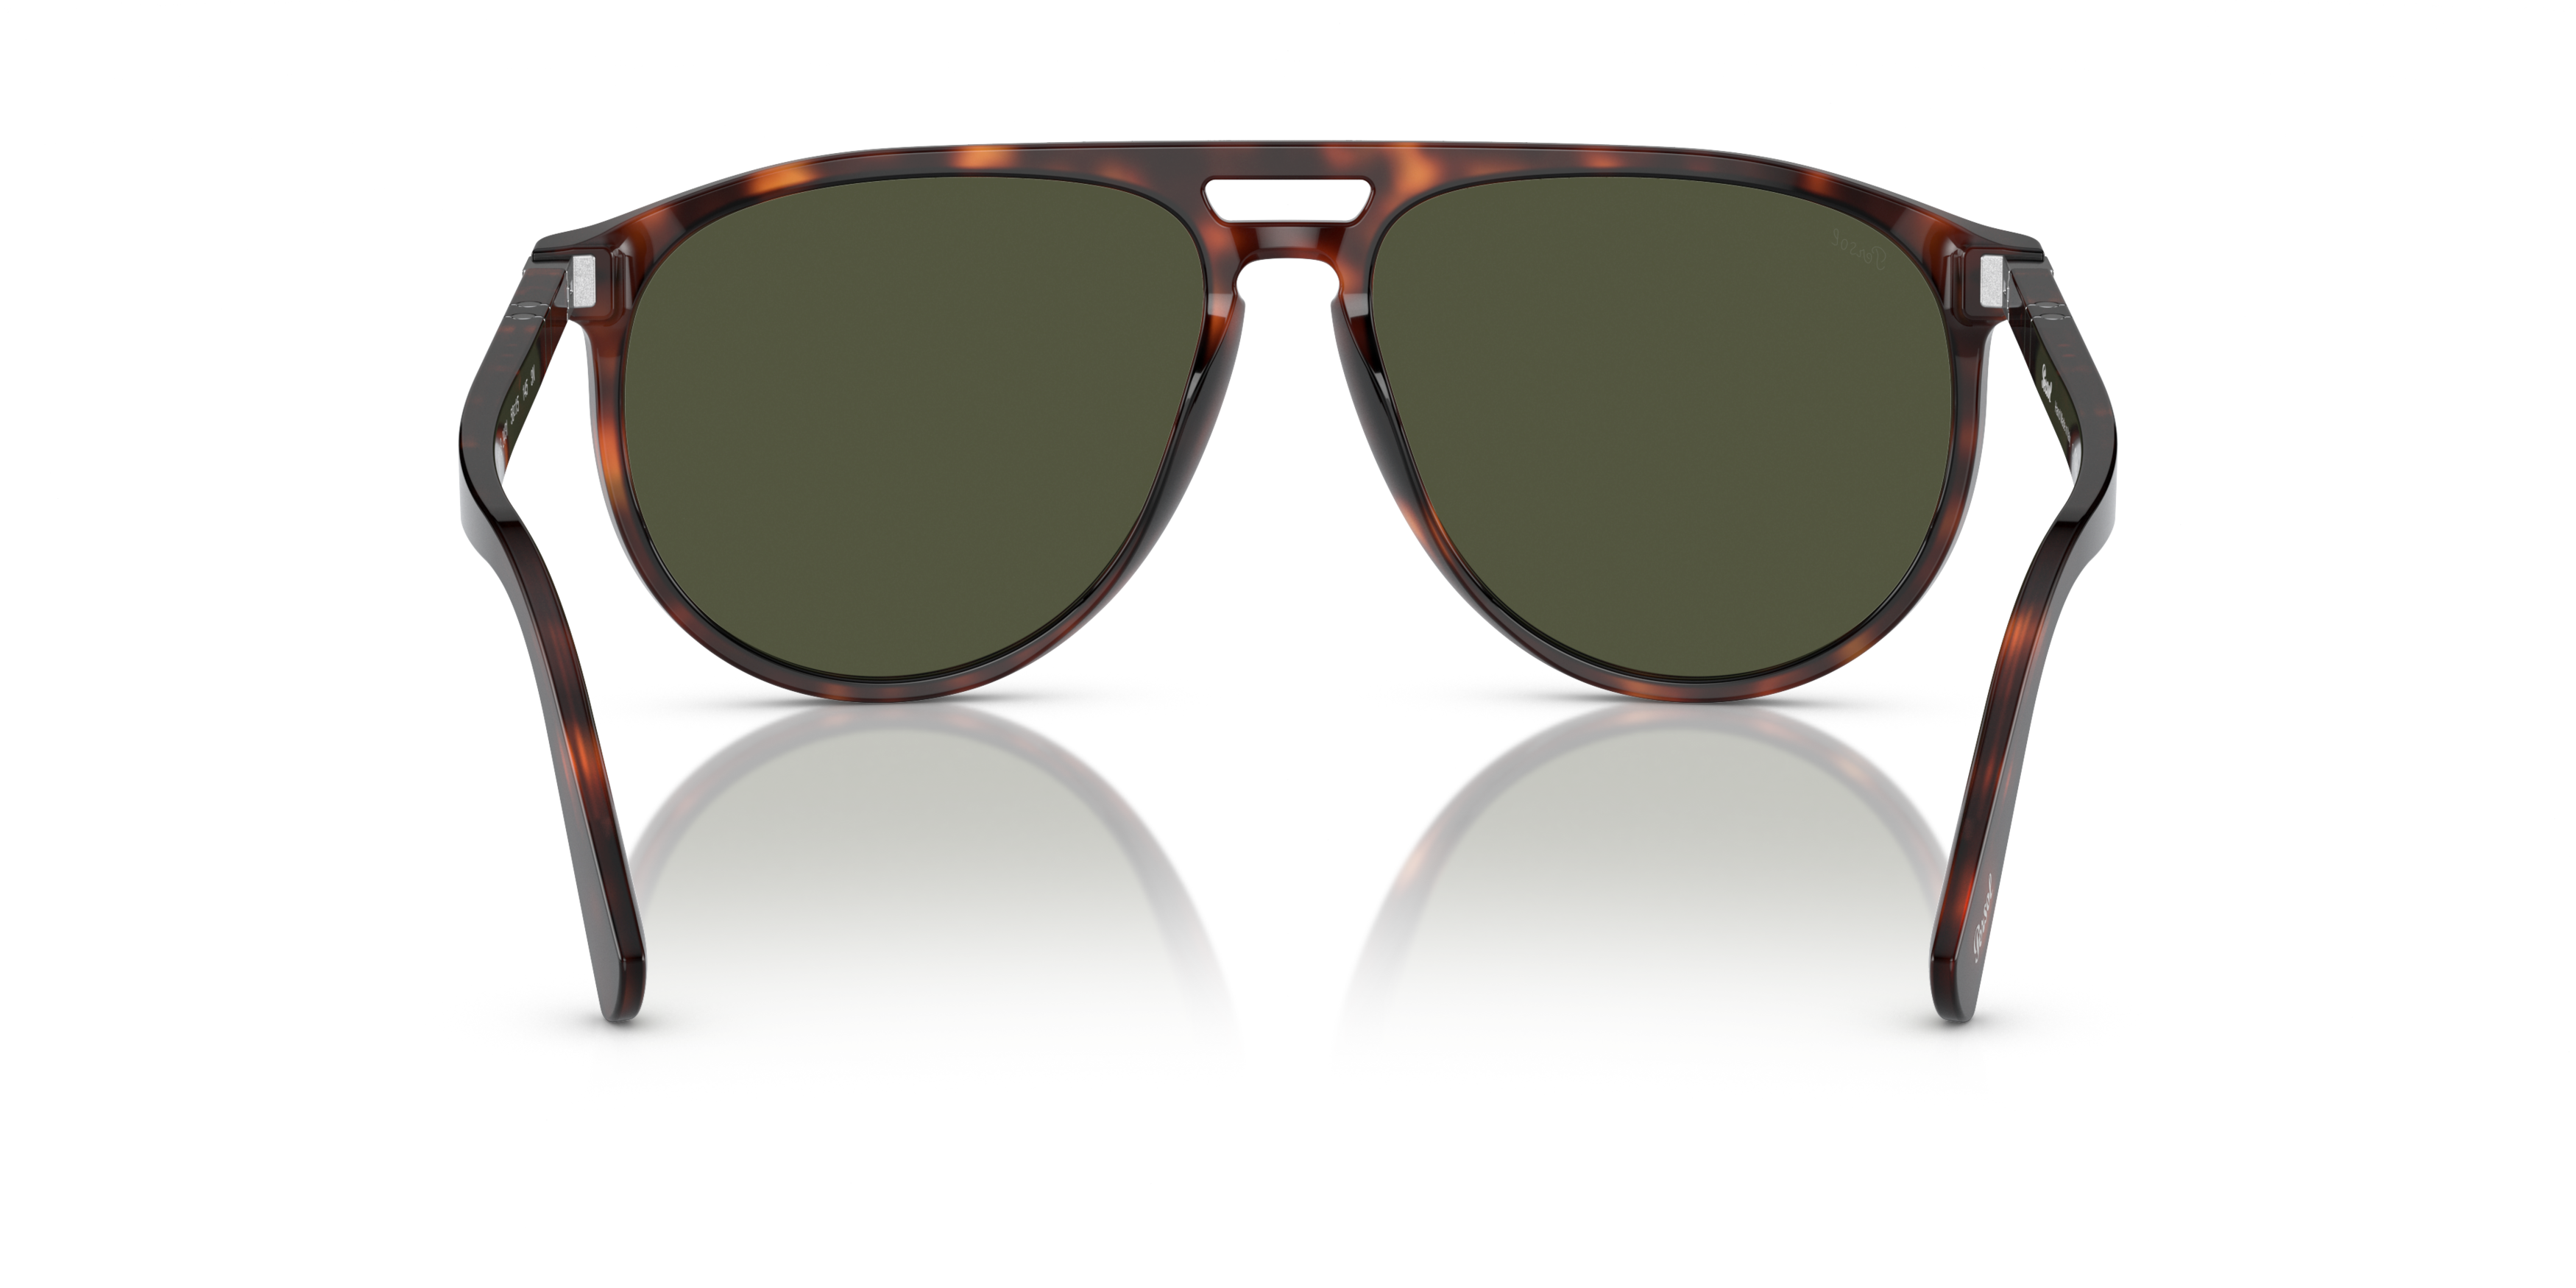 [products.image.detail02] PERSOL PO3311S 24/31